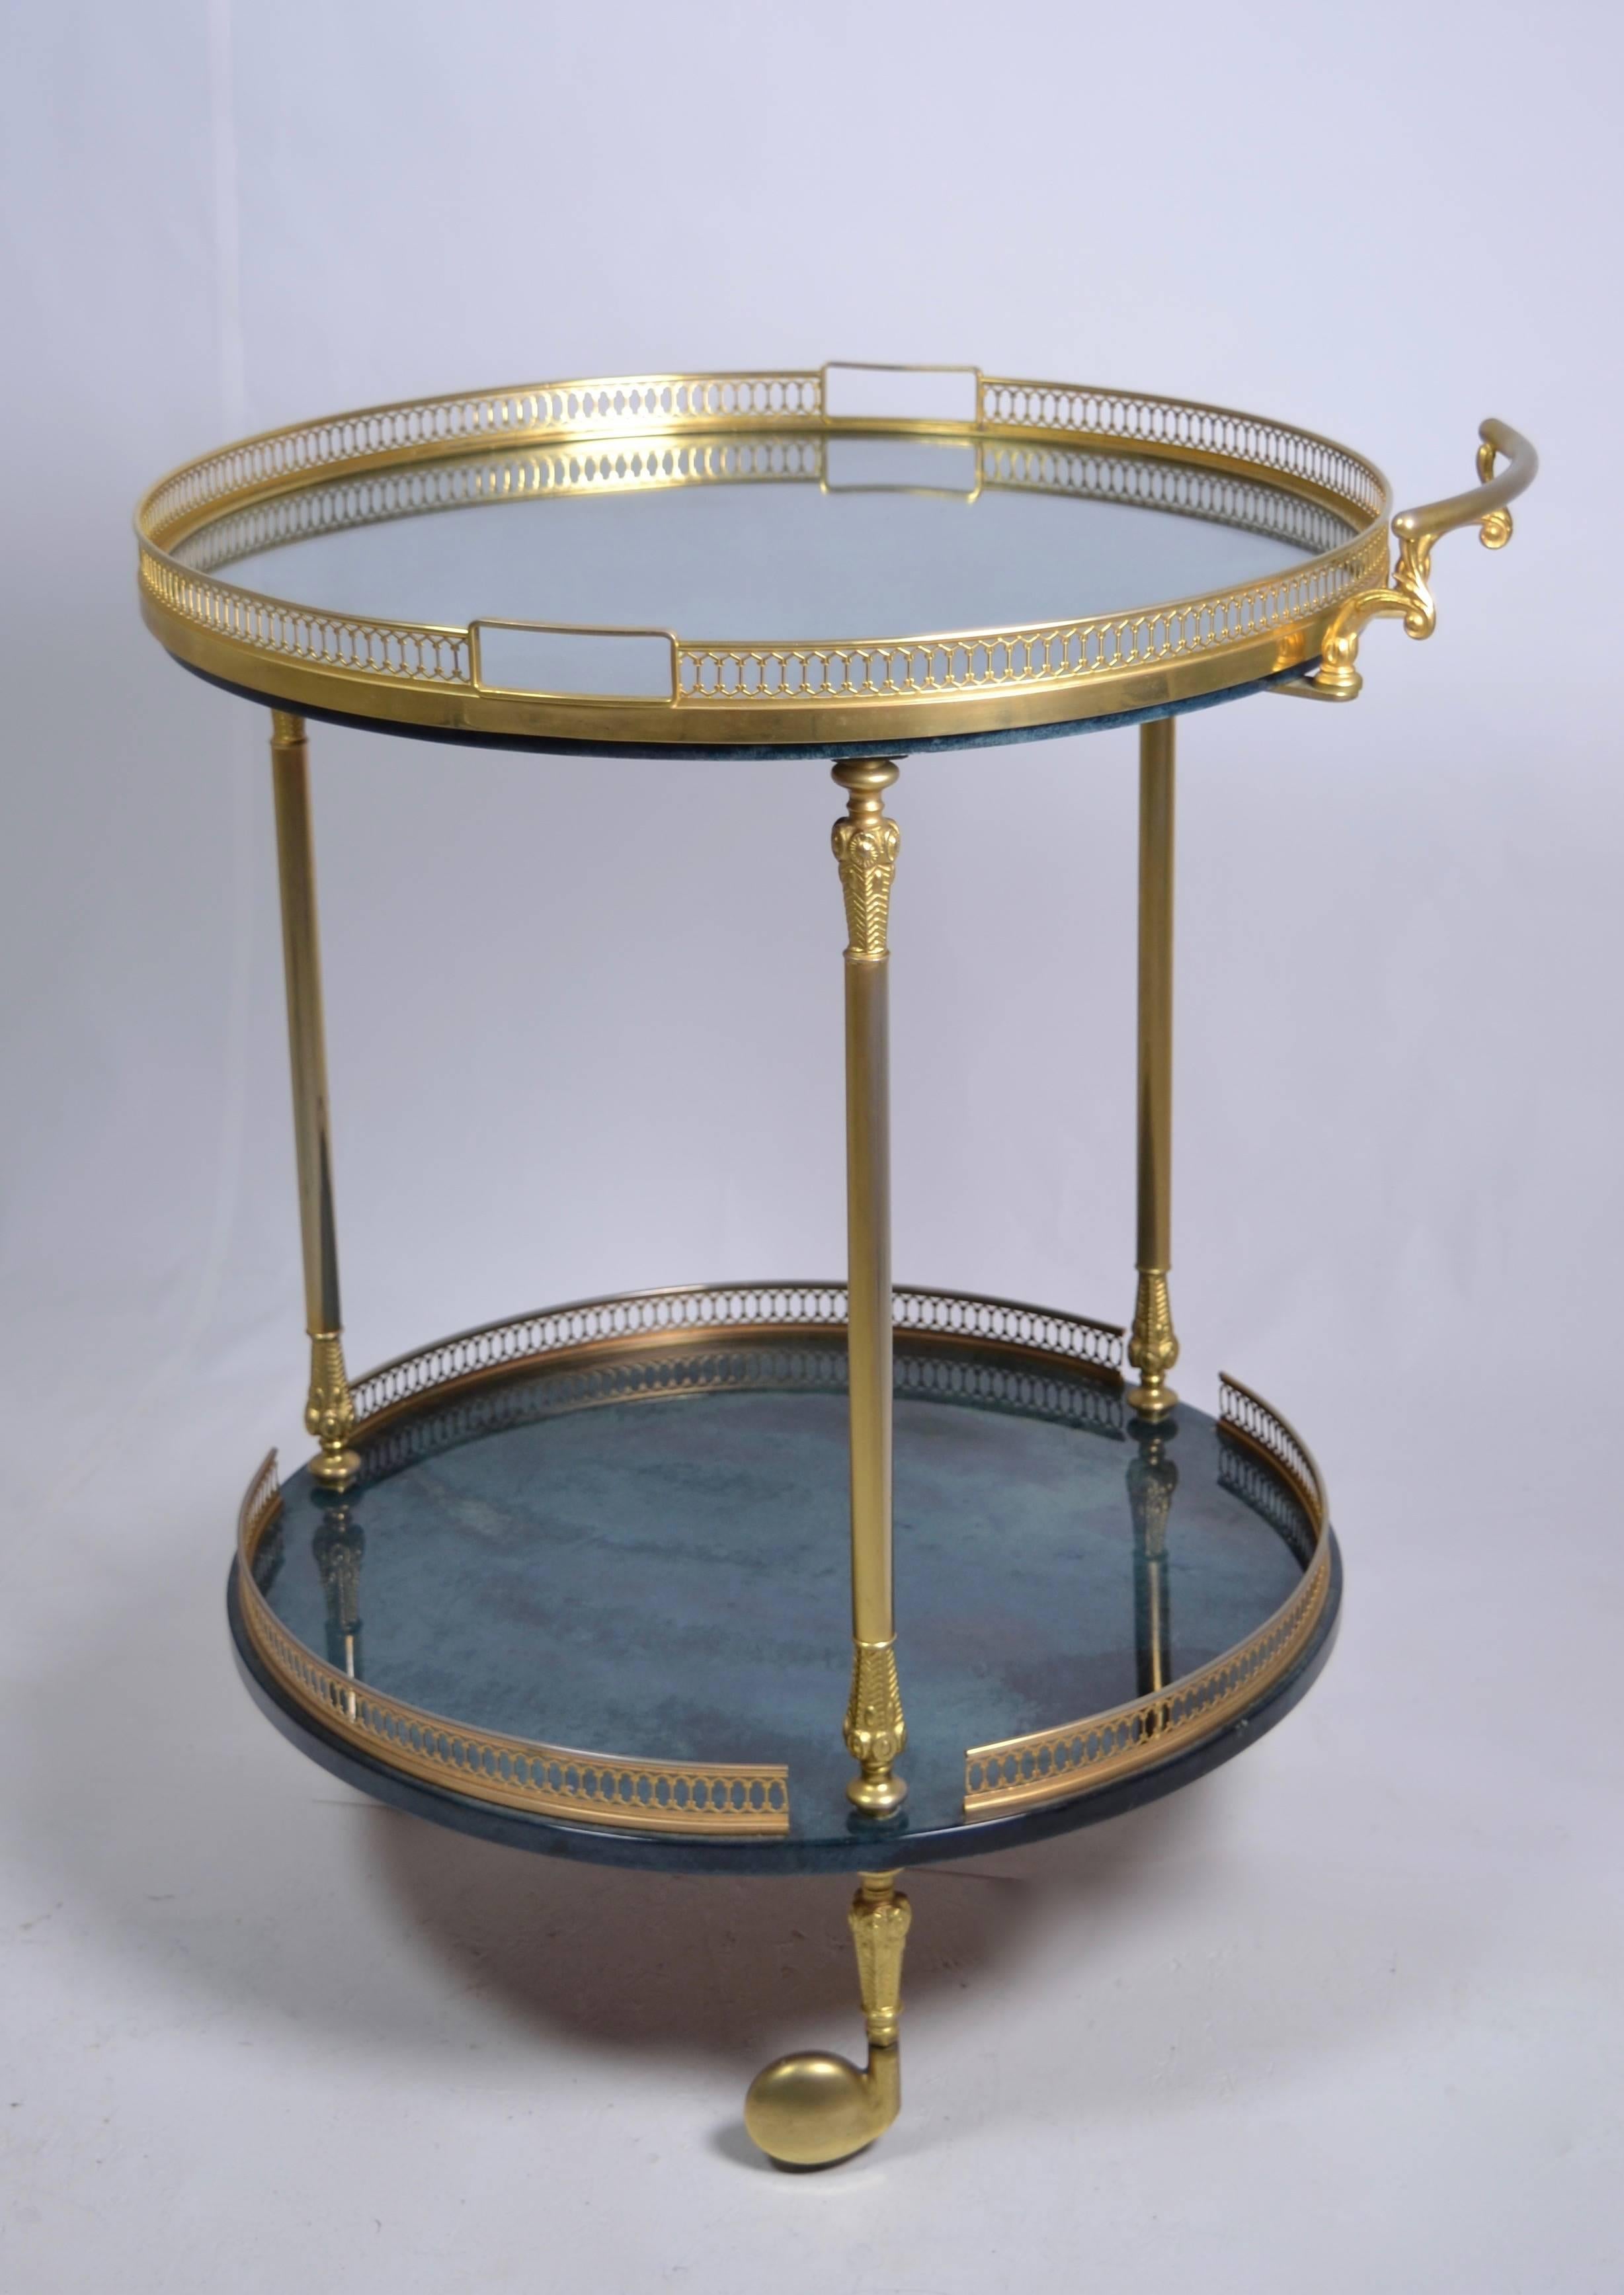 It's all about the great blue color of the lacquered goat skin on this Classic Aldo Tura bar cart. Nice quality gold-tone fittings and removable glass serving tray. Really nice condition.